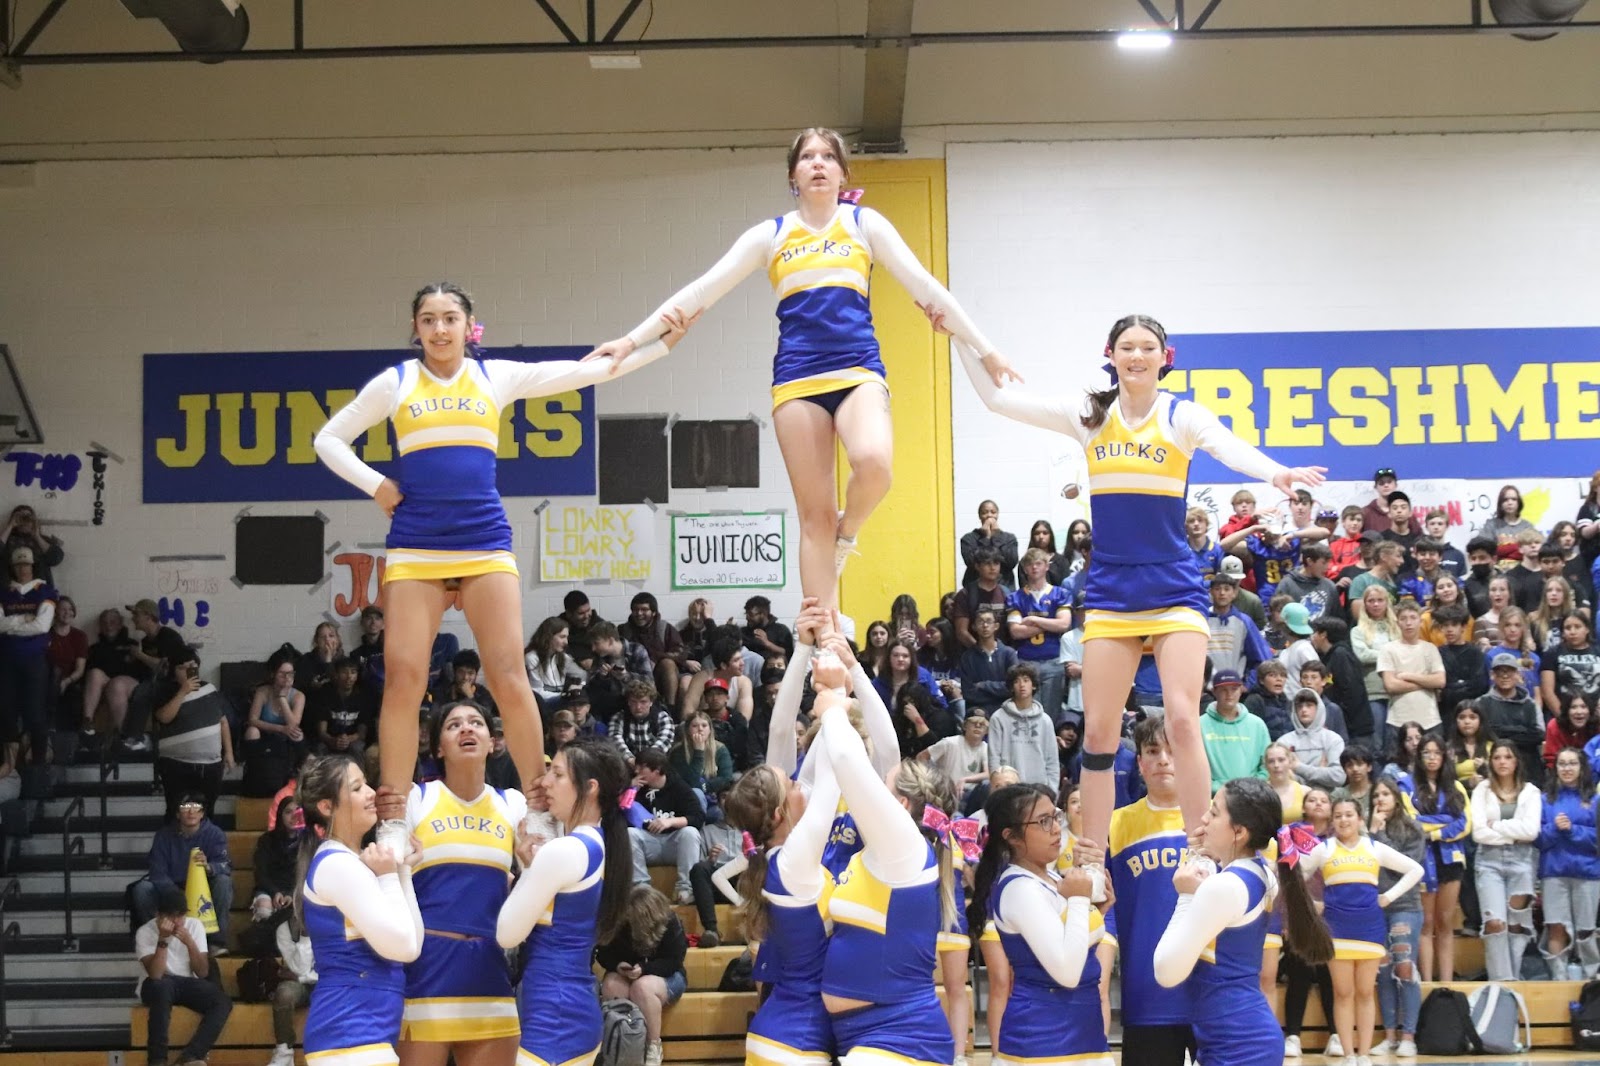 Varsity cheerleaders put on a show during the Homecoming Pep assembly to energize the crowd for the upcoming game. /Elizabeth Carrillo • The Brand